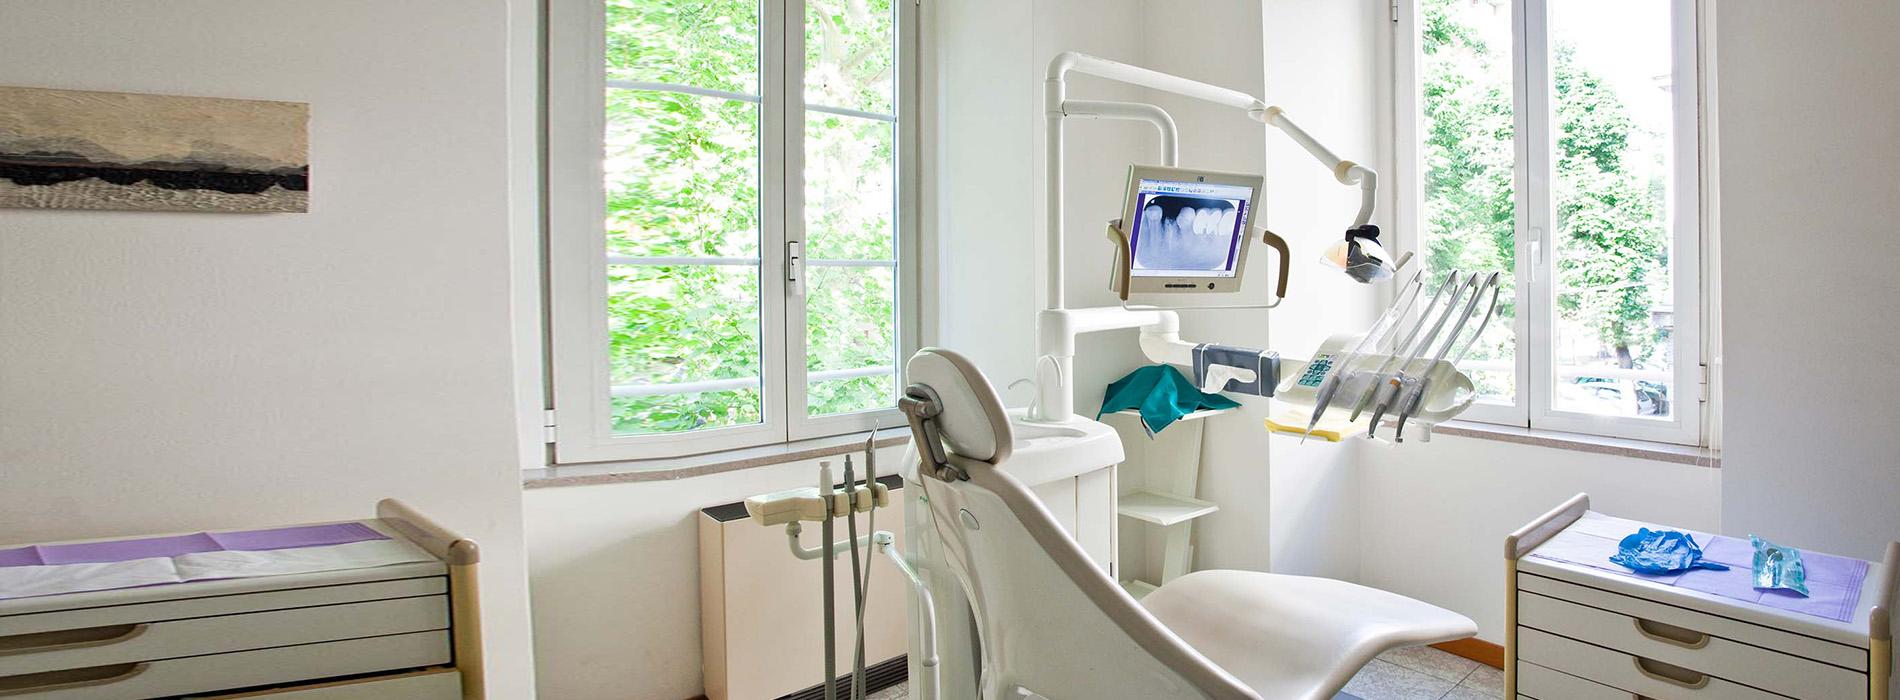 The image shows an interior space that appears to be a dental office, featuring a modern dental chair and equipment, with natural light coming through windows.